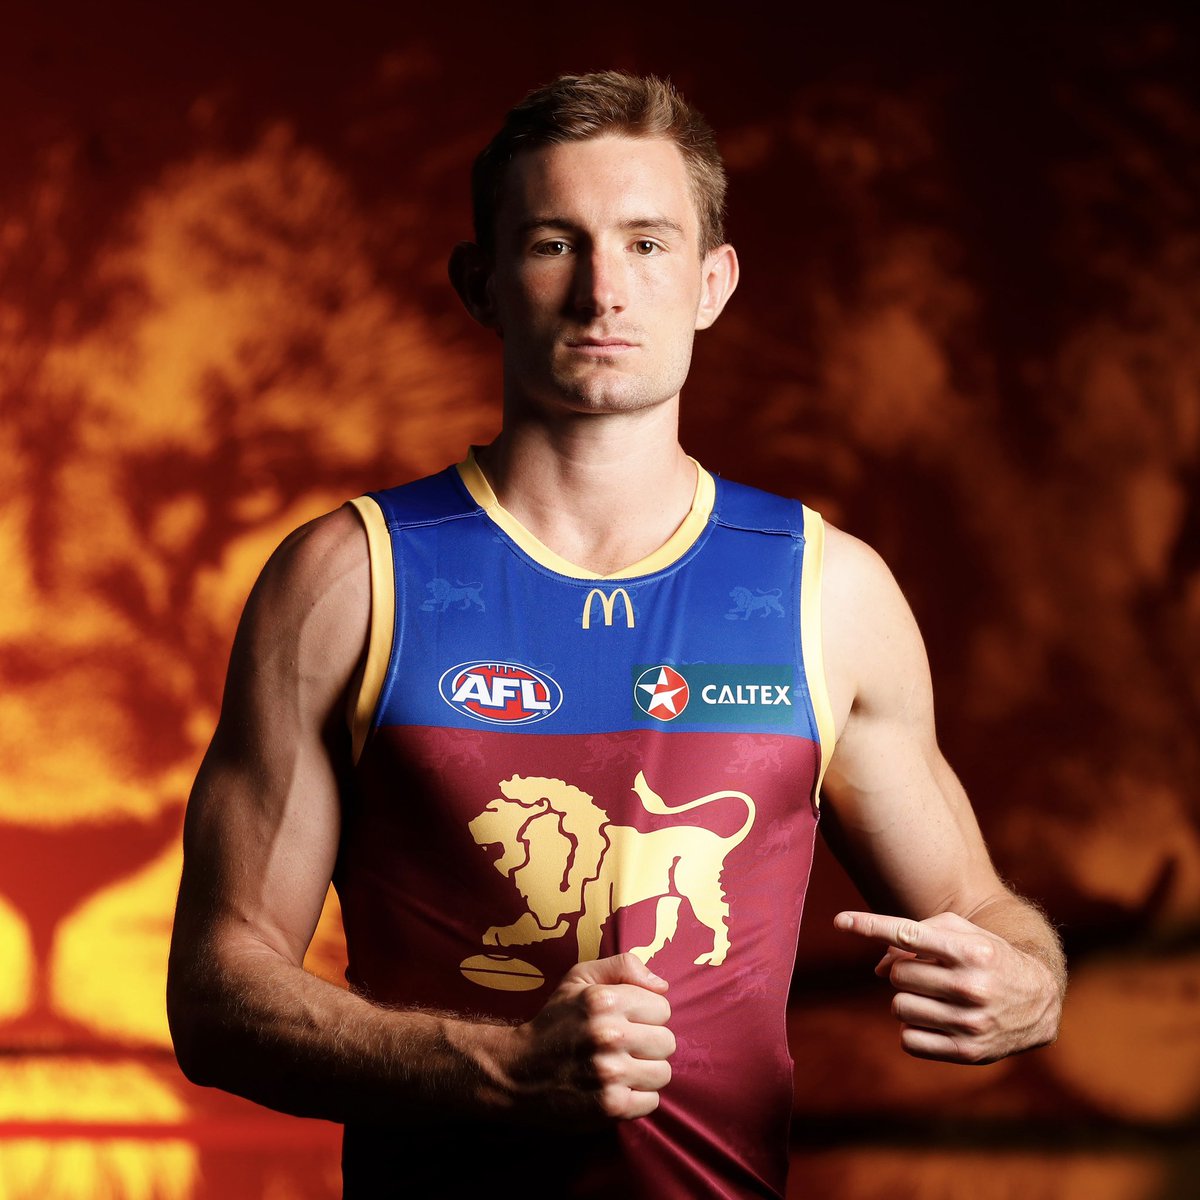 From the Hornets hive to king of the jungle 👑 Aspley Junior and @brisbanelions superstar, Harris Andrews has been selected to co-captain his team alongside Lachie Neale. ➡️ READ MORE on the Brissie boy and his rise through the ranks at aflq.com.au/brisbane-boy-n…